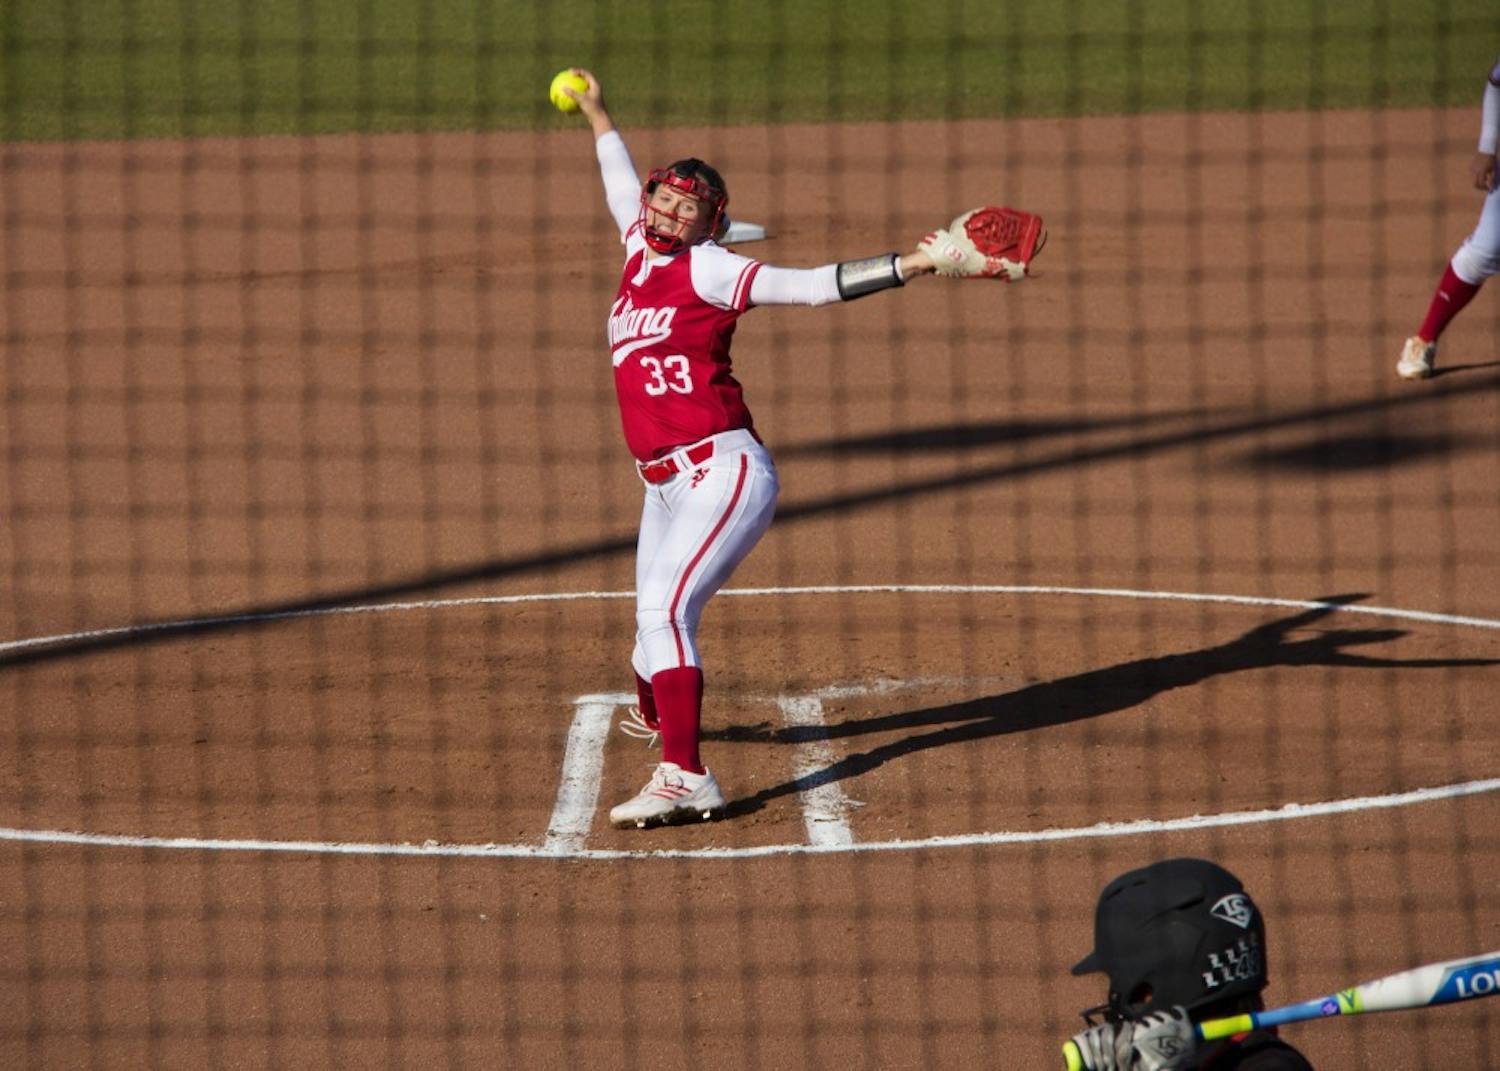 Then-freshman pitcher Tara Trainer, now a junior, throws a pitch during an April 2016 game against the University of Louisville. The Hoosiers went 1-3 in the Samford Tournament this weekend.